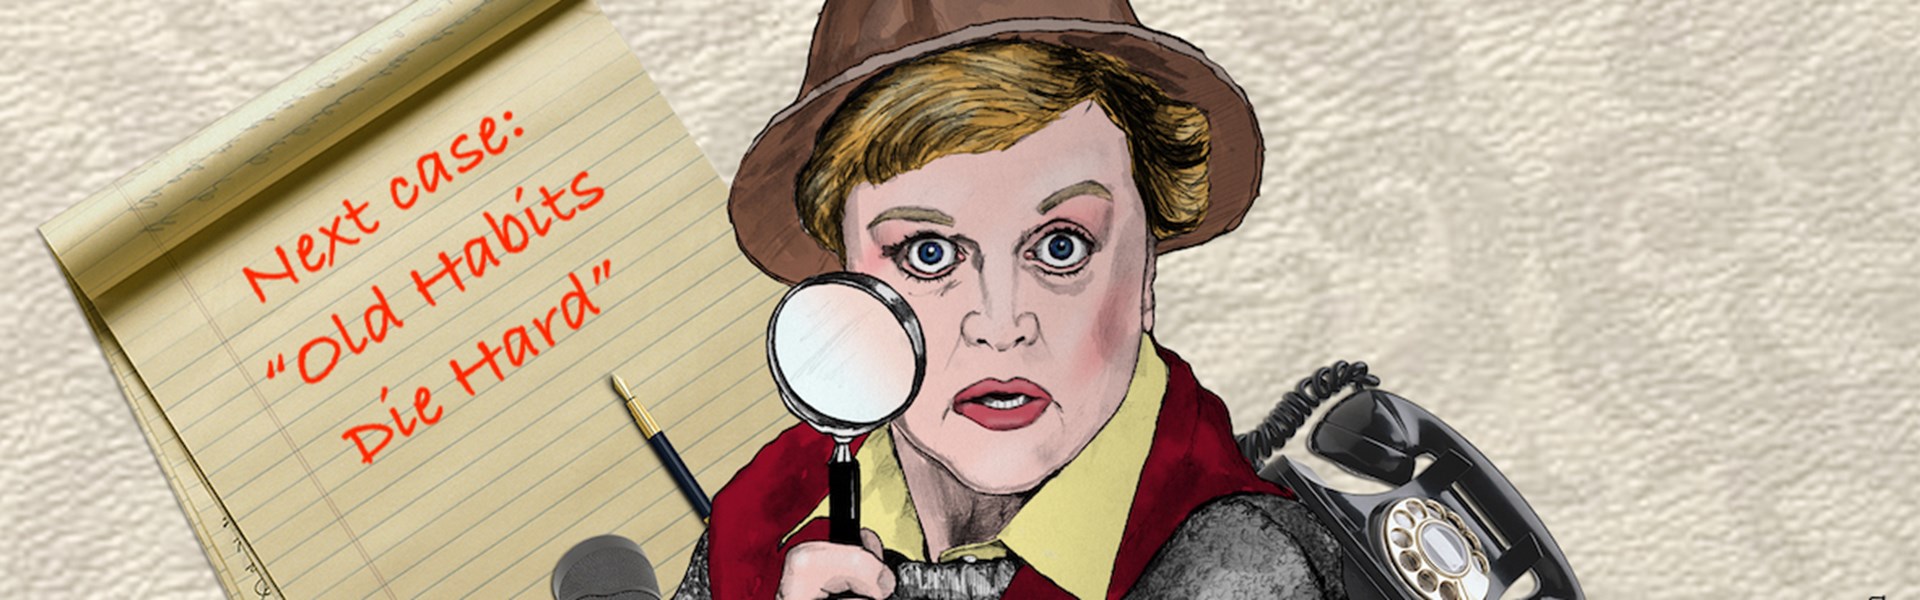 Solve-Along-A-Murder-She-Wrote